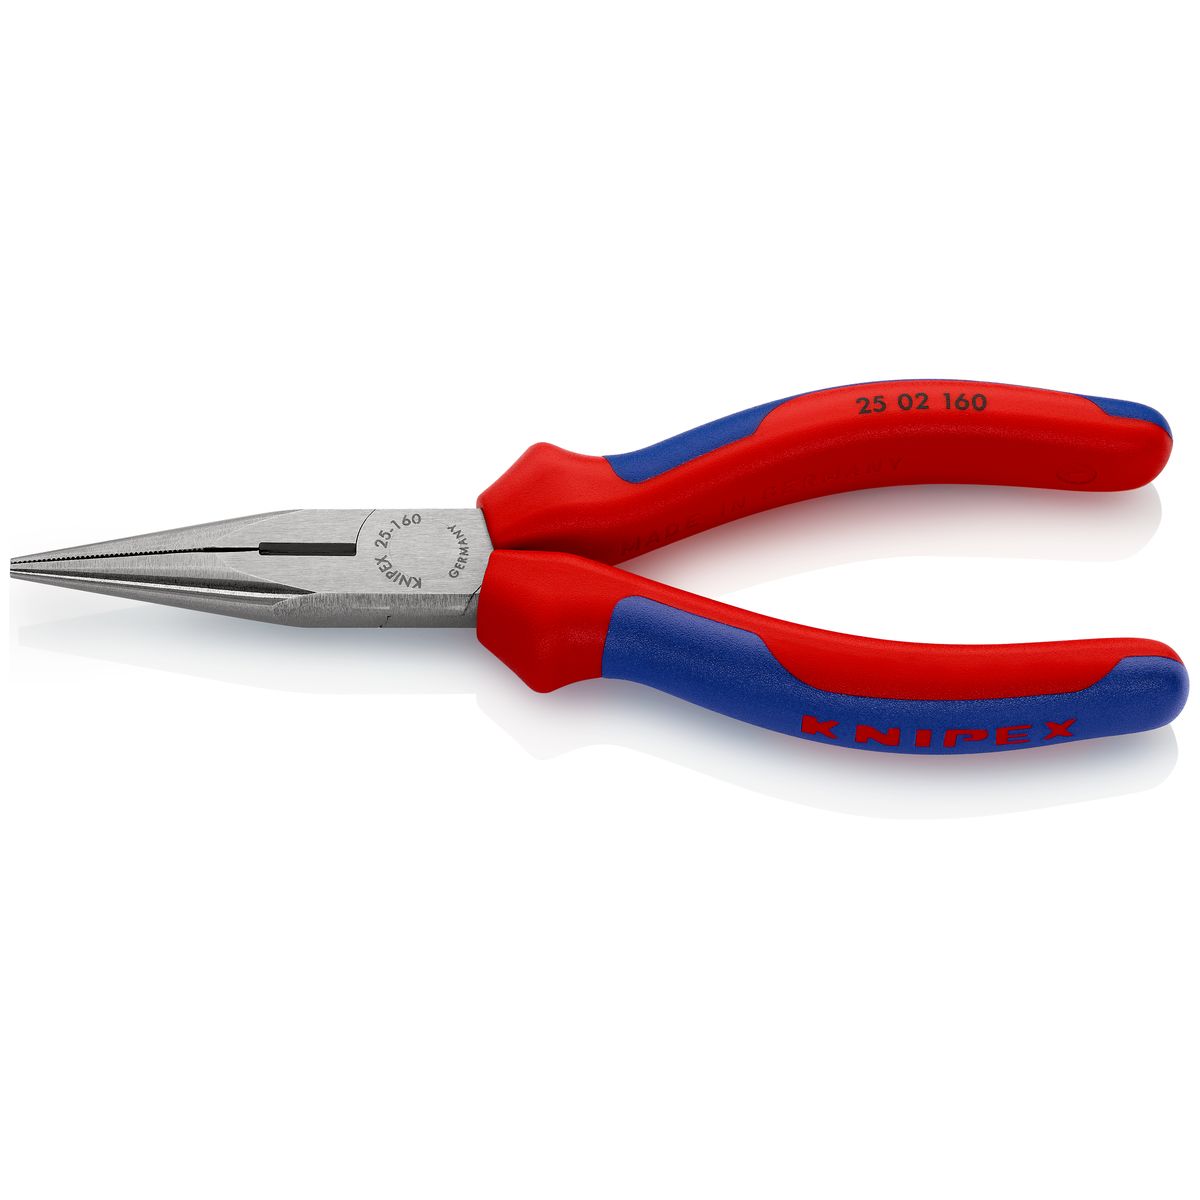 CHAIN NOSE SIDE CUTTING PLIERS 2502160 Knipex